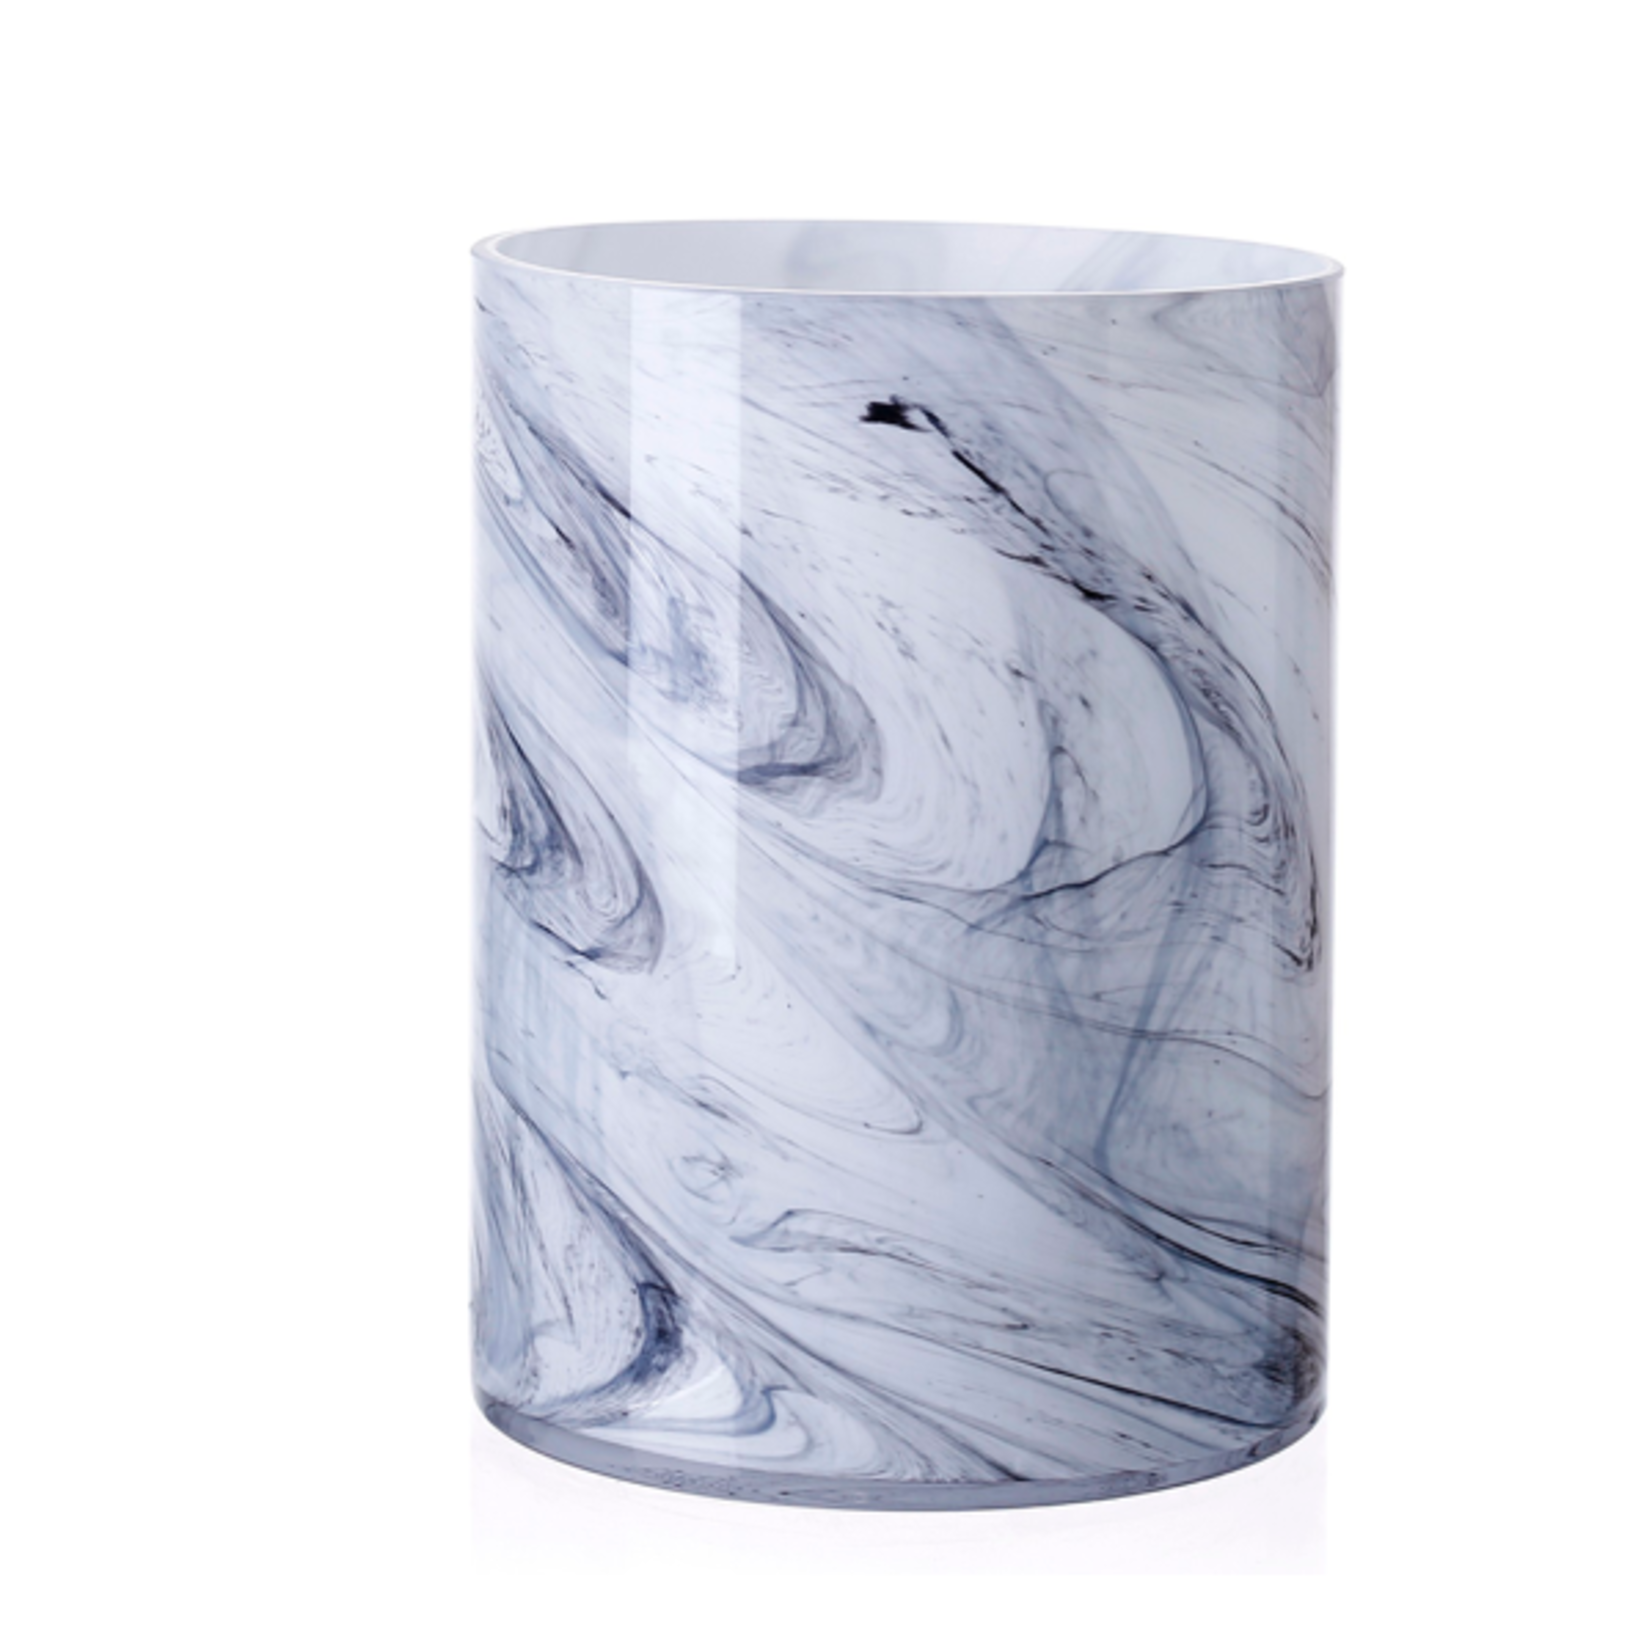 8"h x 6" MARBLE LIKE GLASS CYLINDER